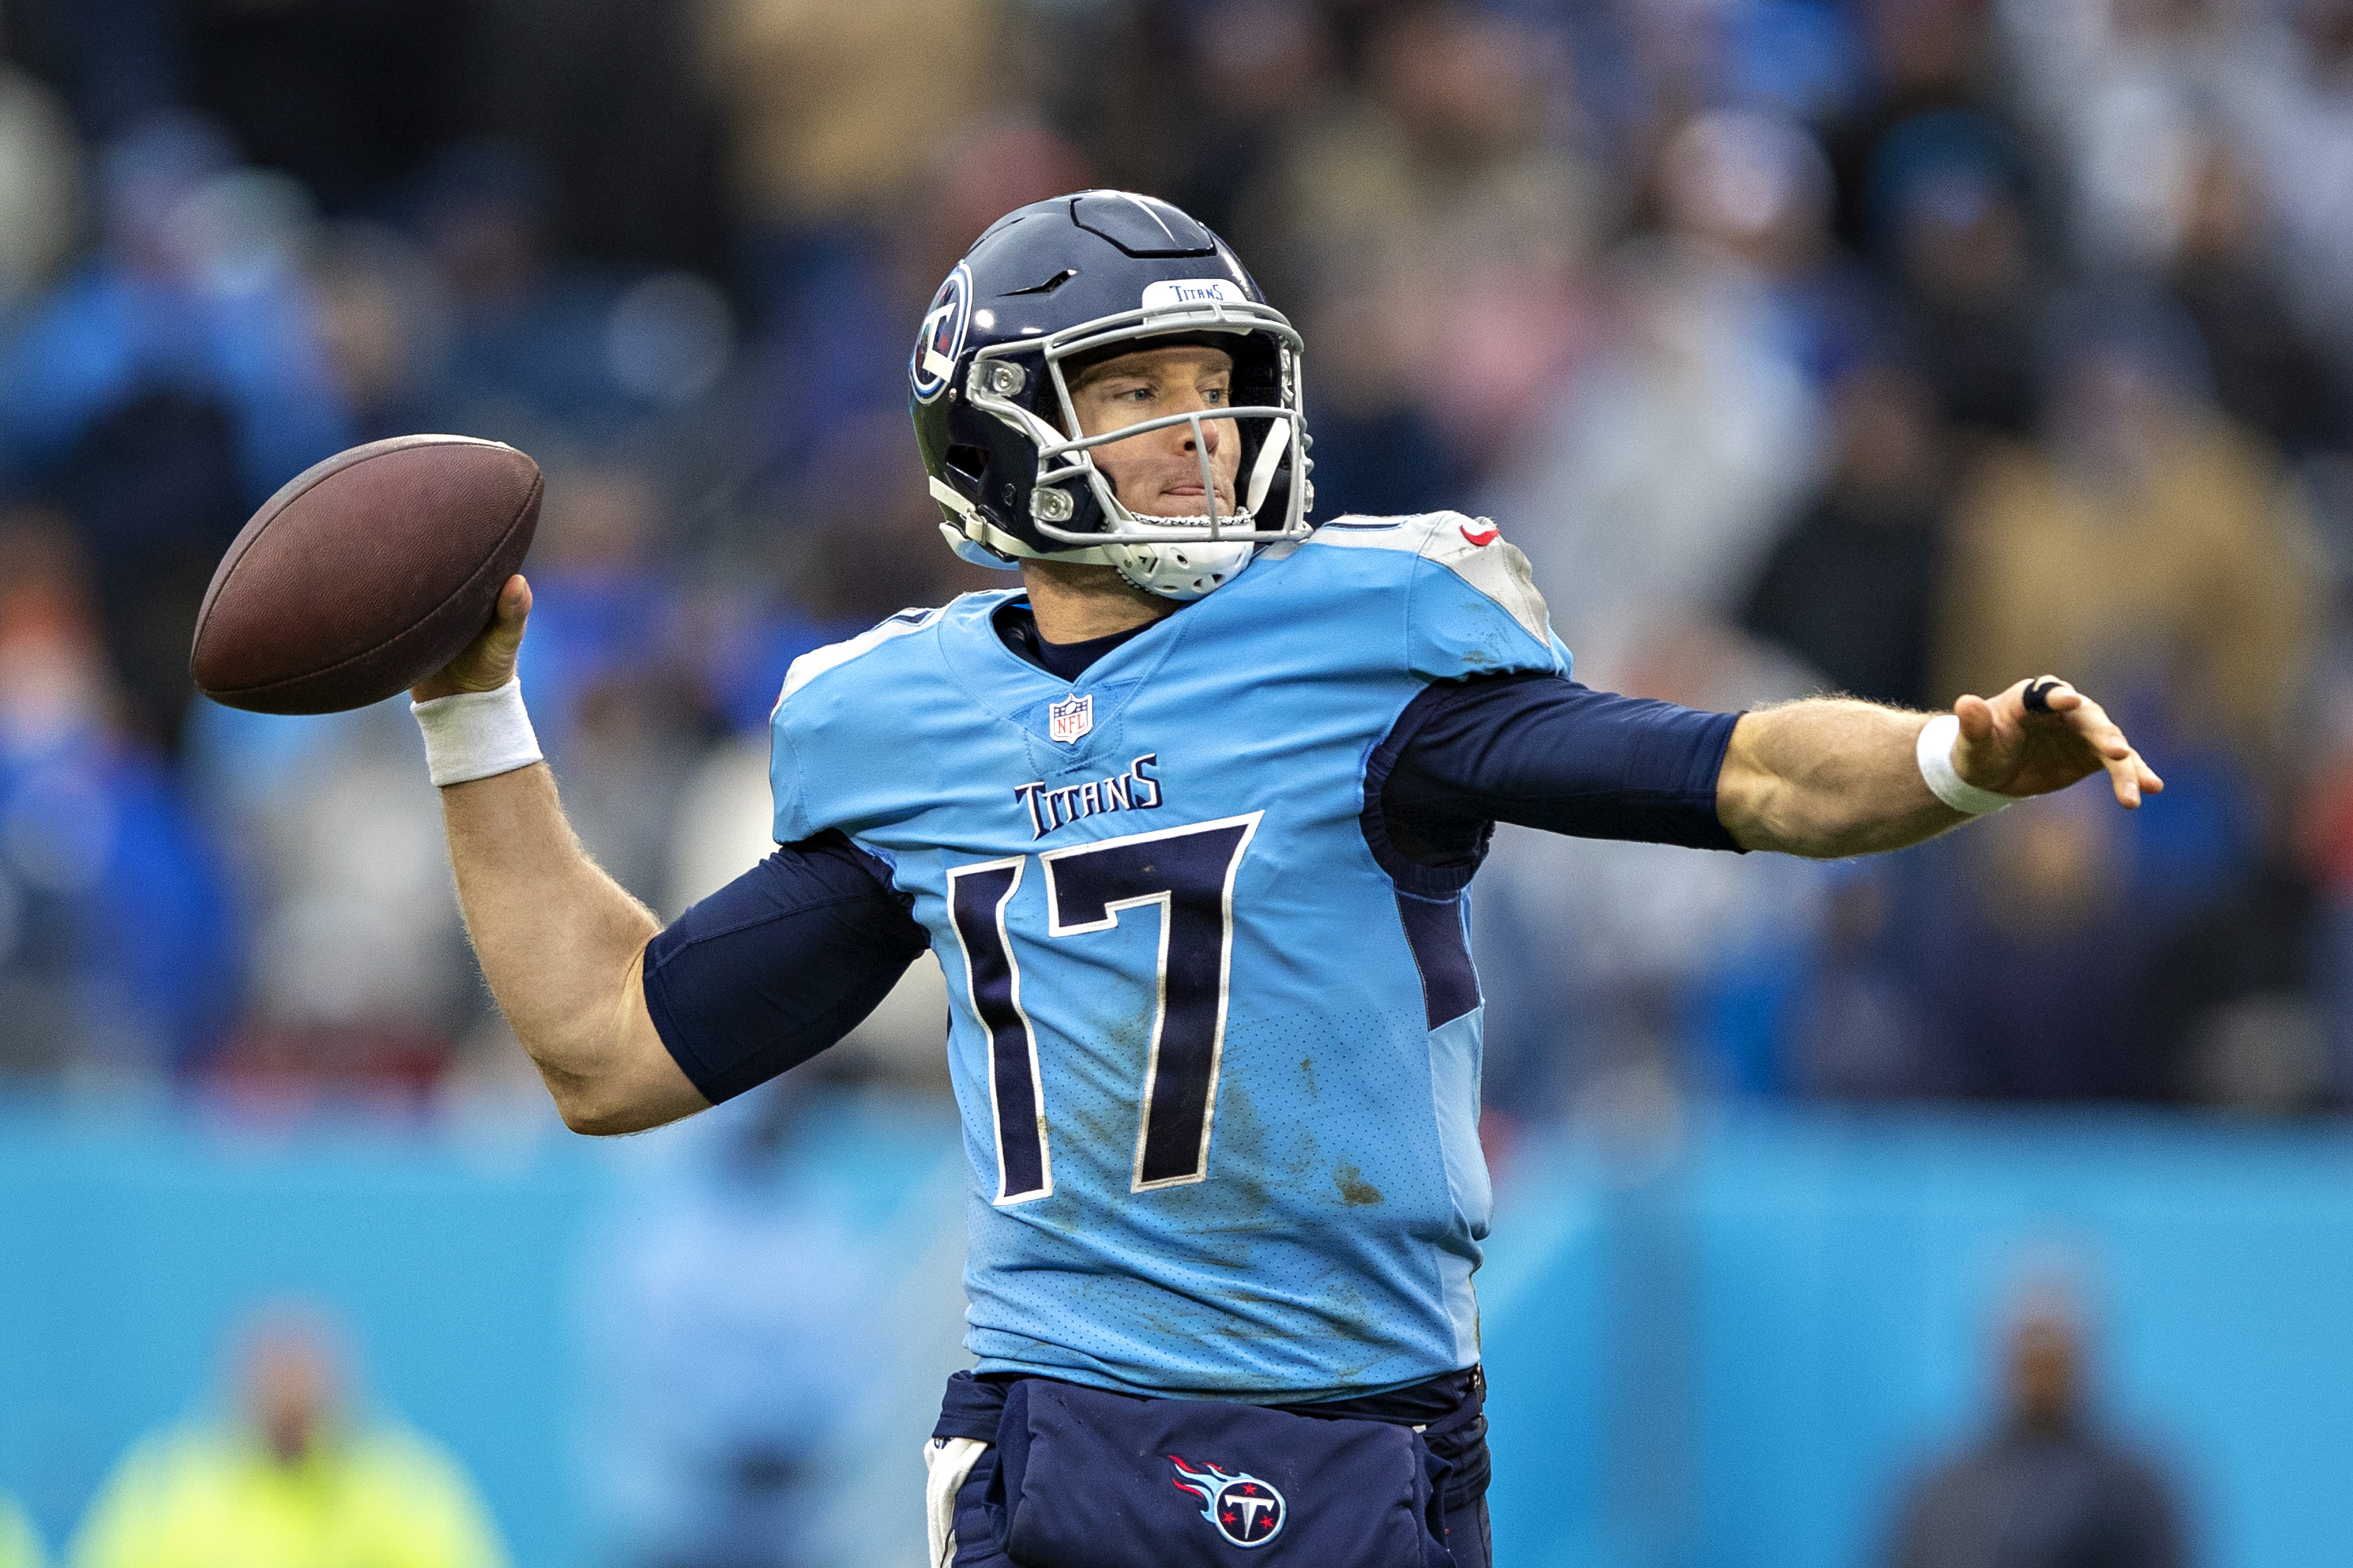 Titans Playoffs Schedule 2022: List of Games, Opponents, TV Channel & Kickoff Times for Tennessee in Postseason